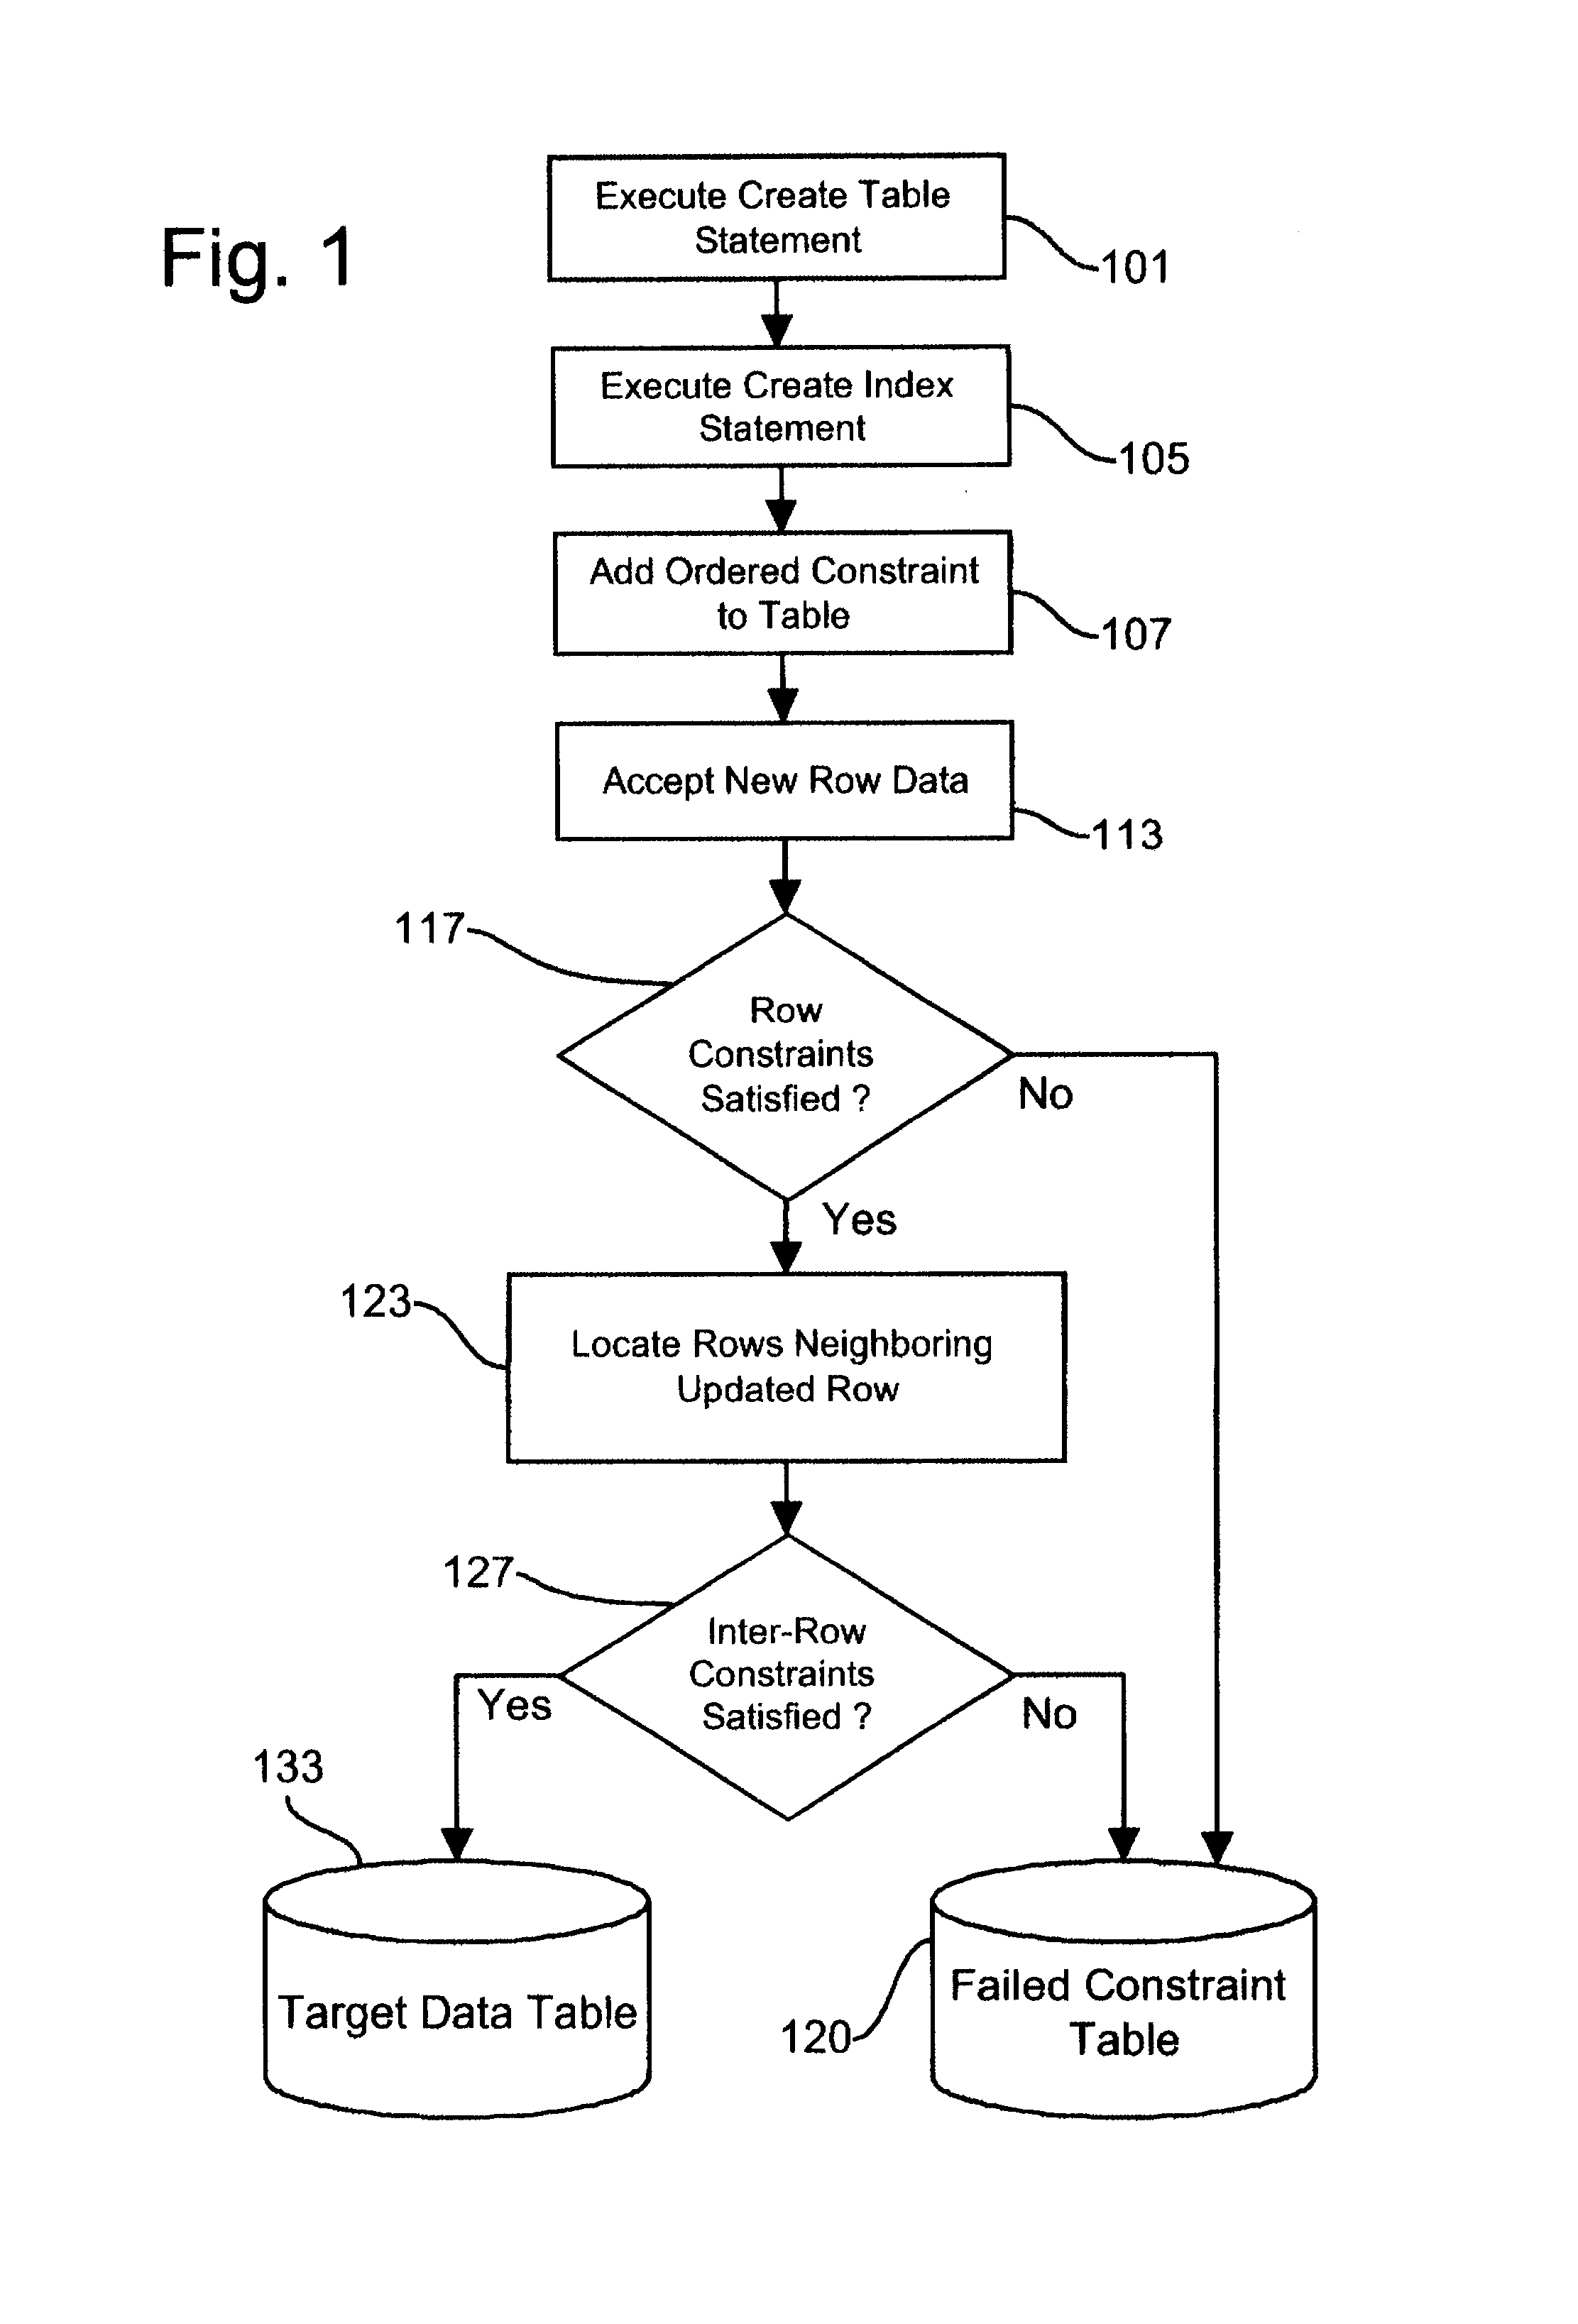 Generalized method for modeling complex ordered check constraints in a relational database system